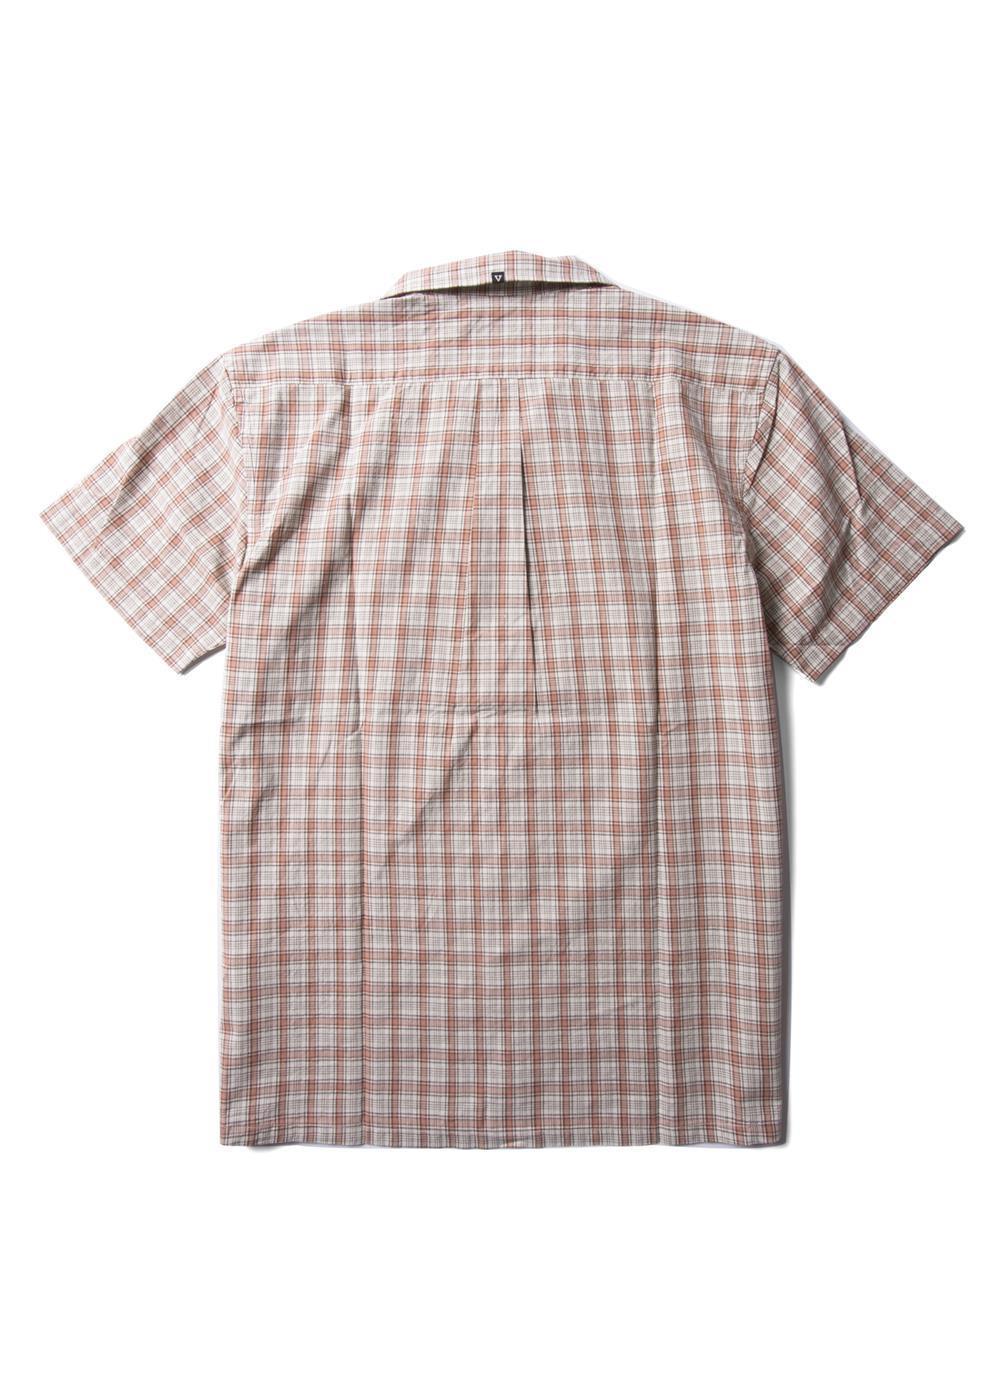 Undefined Lines Eco Ss Shirt